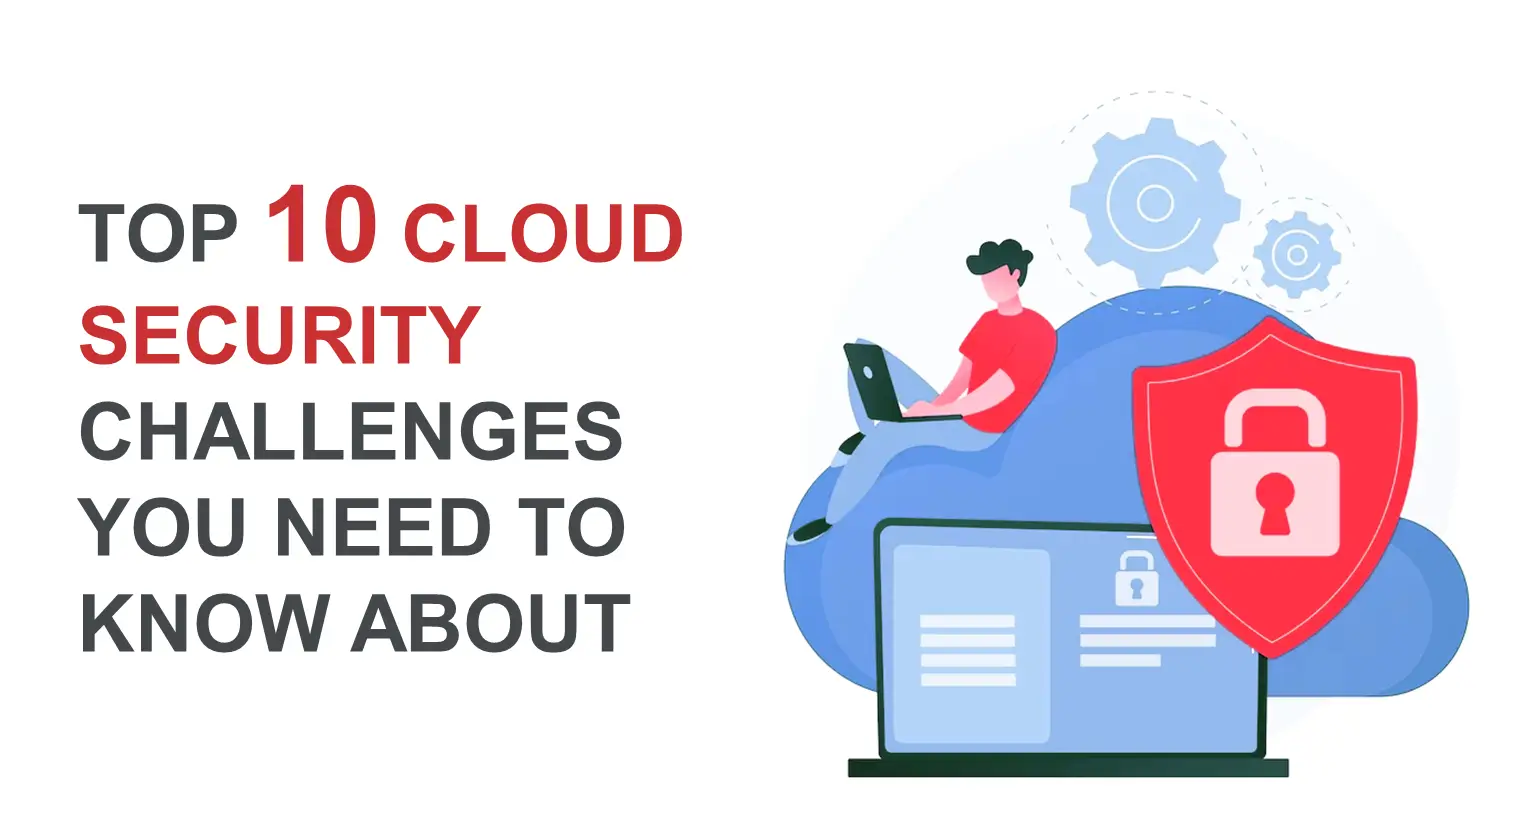 Top 10 Cloud Security Challenges You Need to Know About